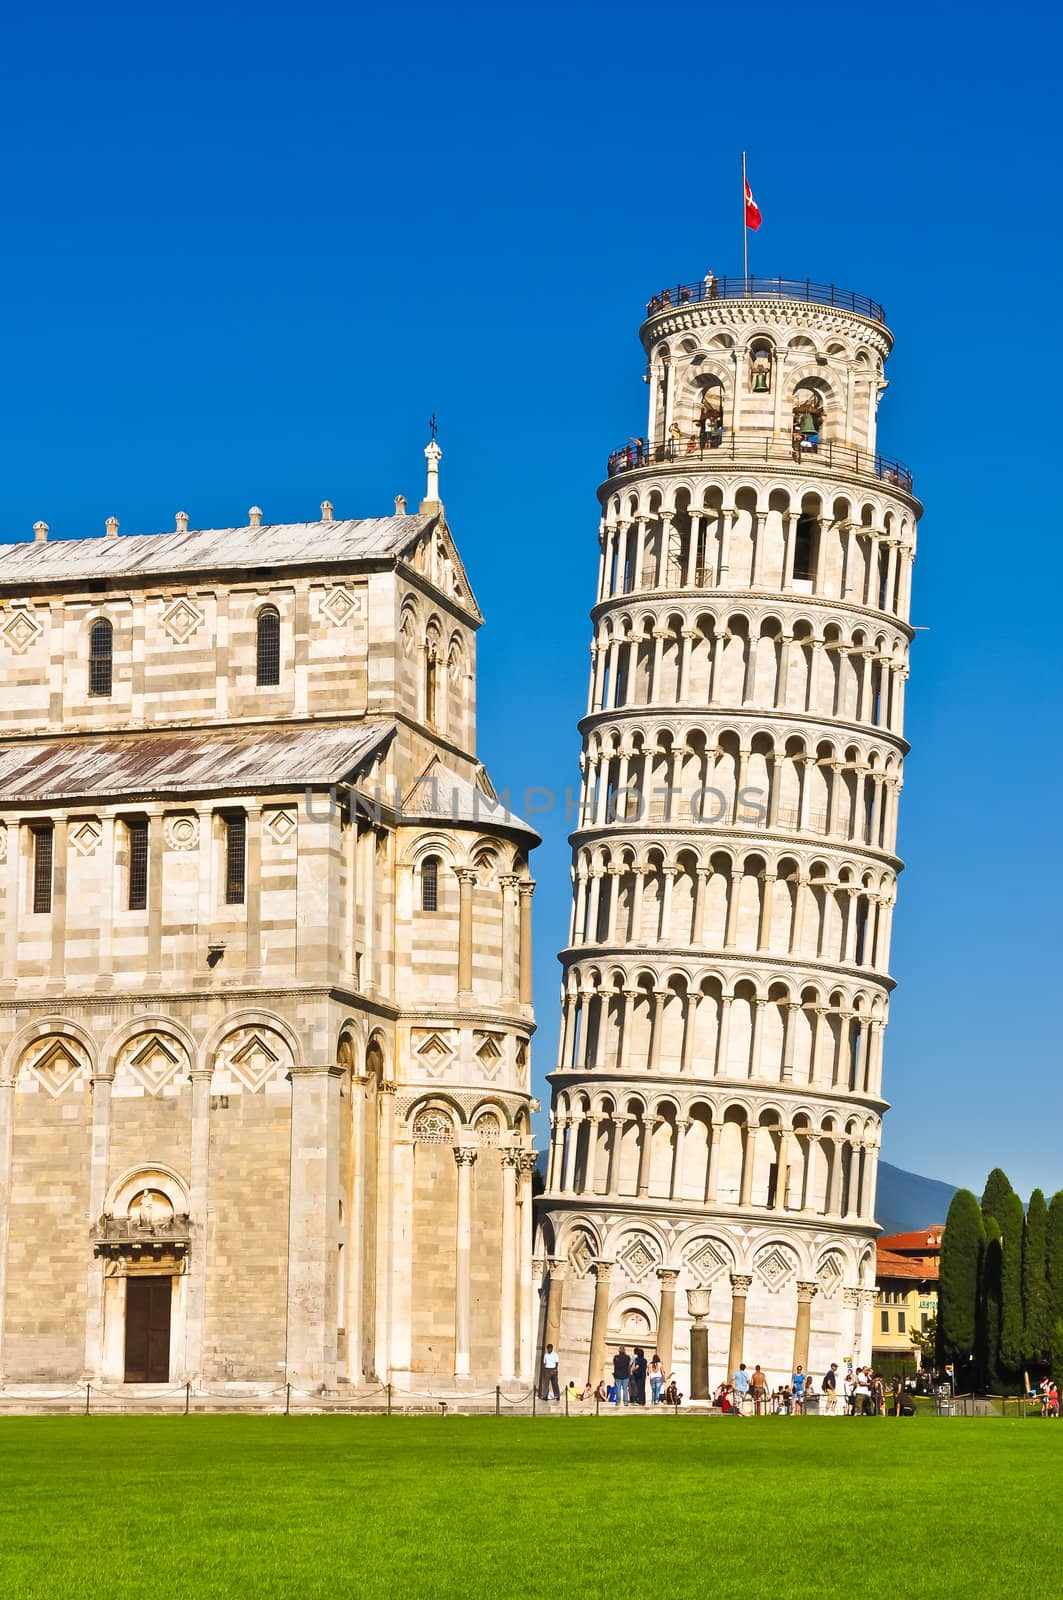 Leaning tower of Pisa, Tuscany, Italy by martinm303